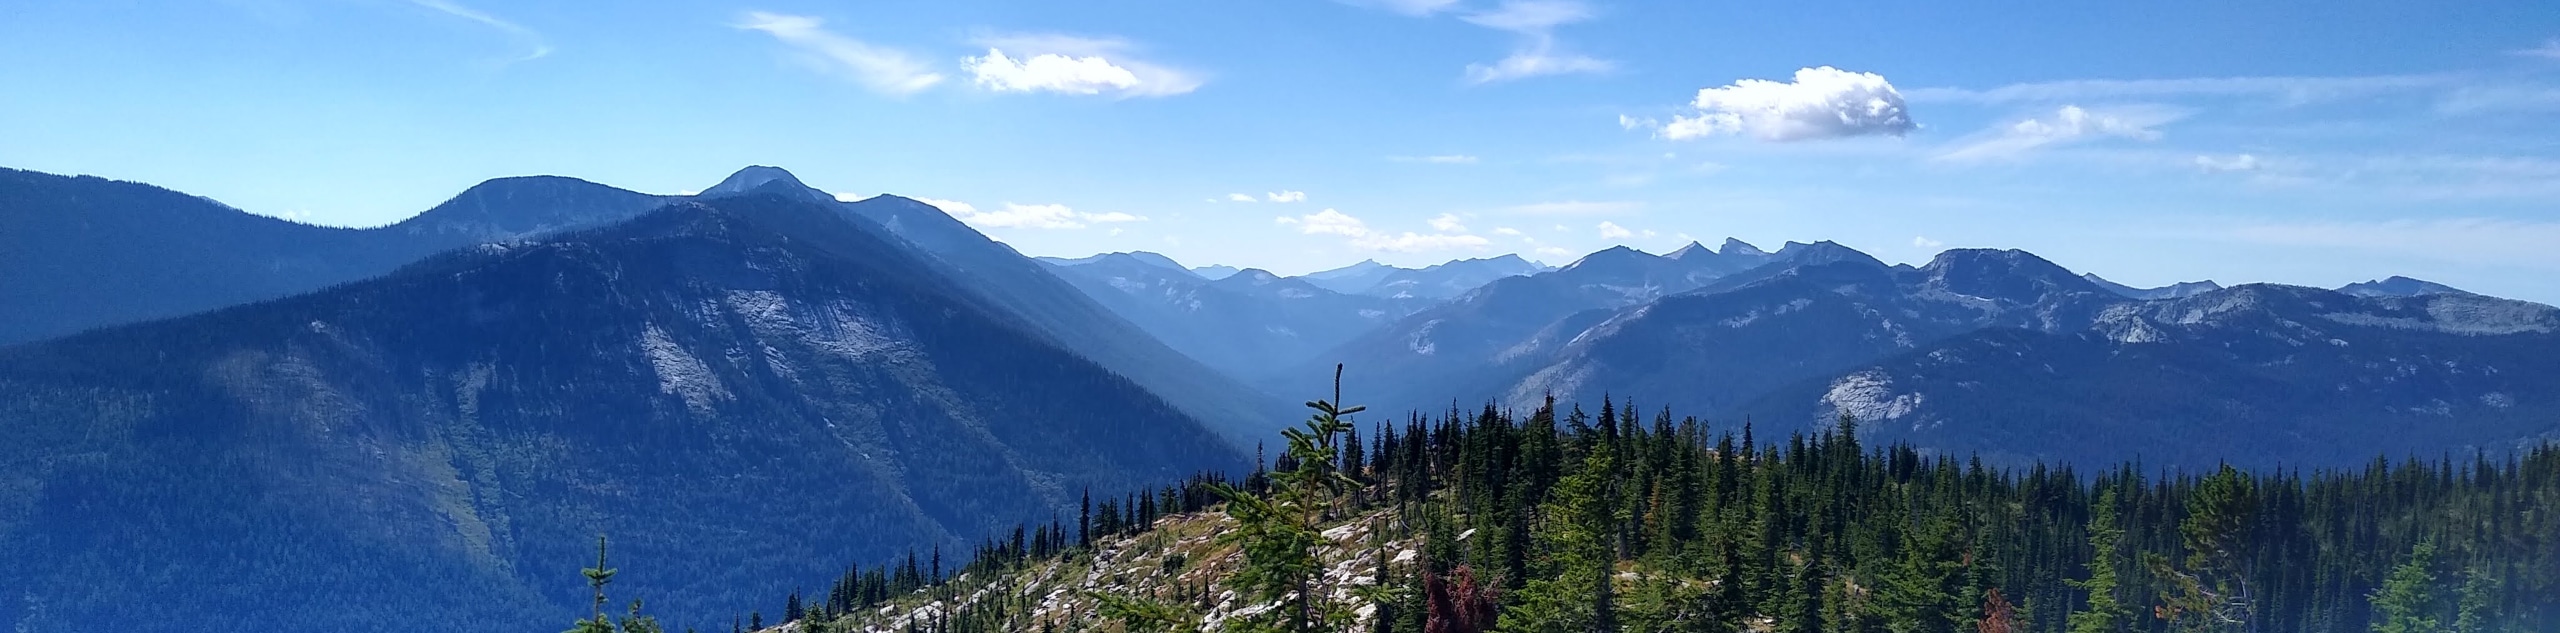 Idaho Panhandle National Forests